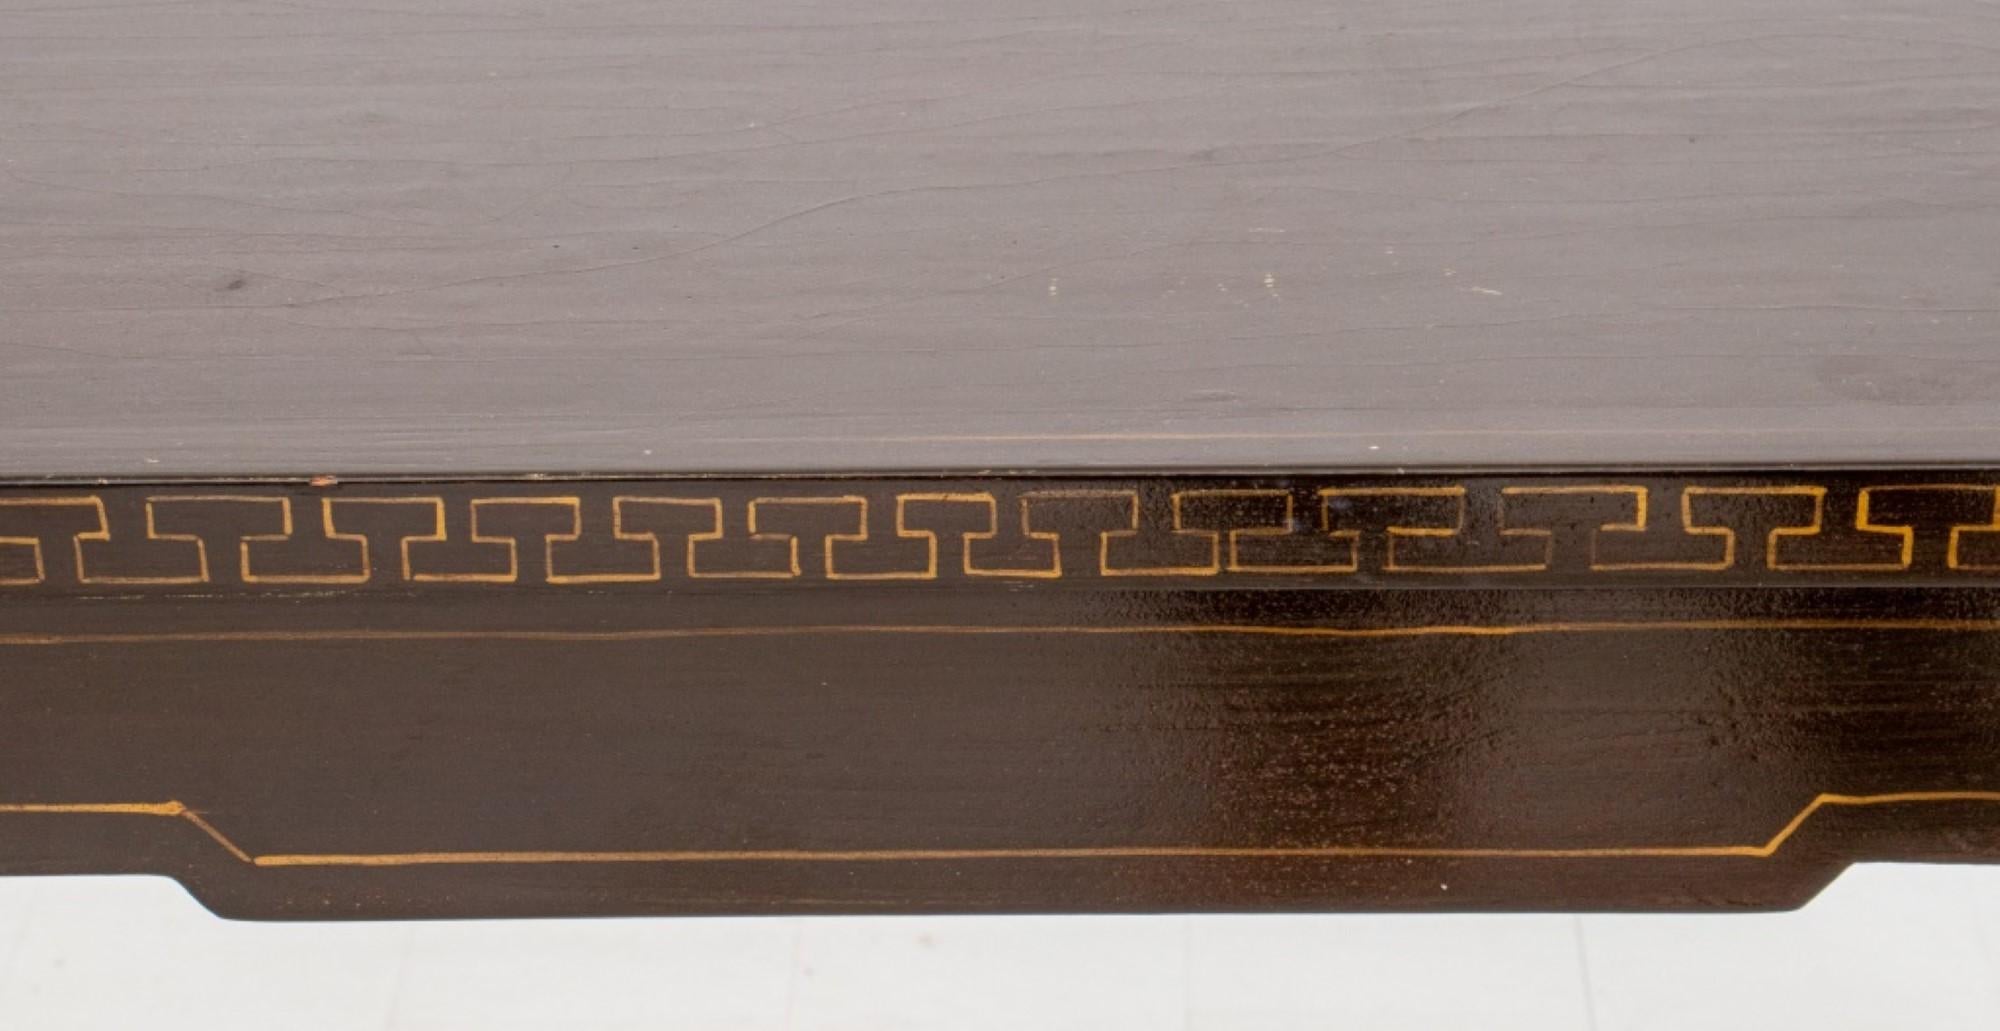 The dimensions for the Chinese lacquered wood console table with scrolled ends and Greek key design are approximately:

Height: 33 inches
Width: 72 inches
Depth: 18 inches



